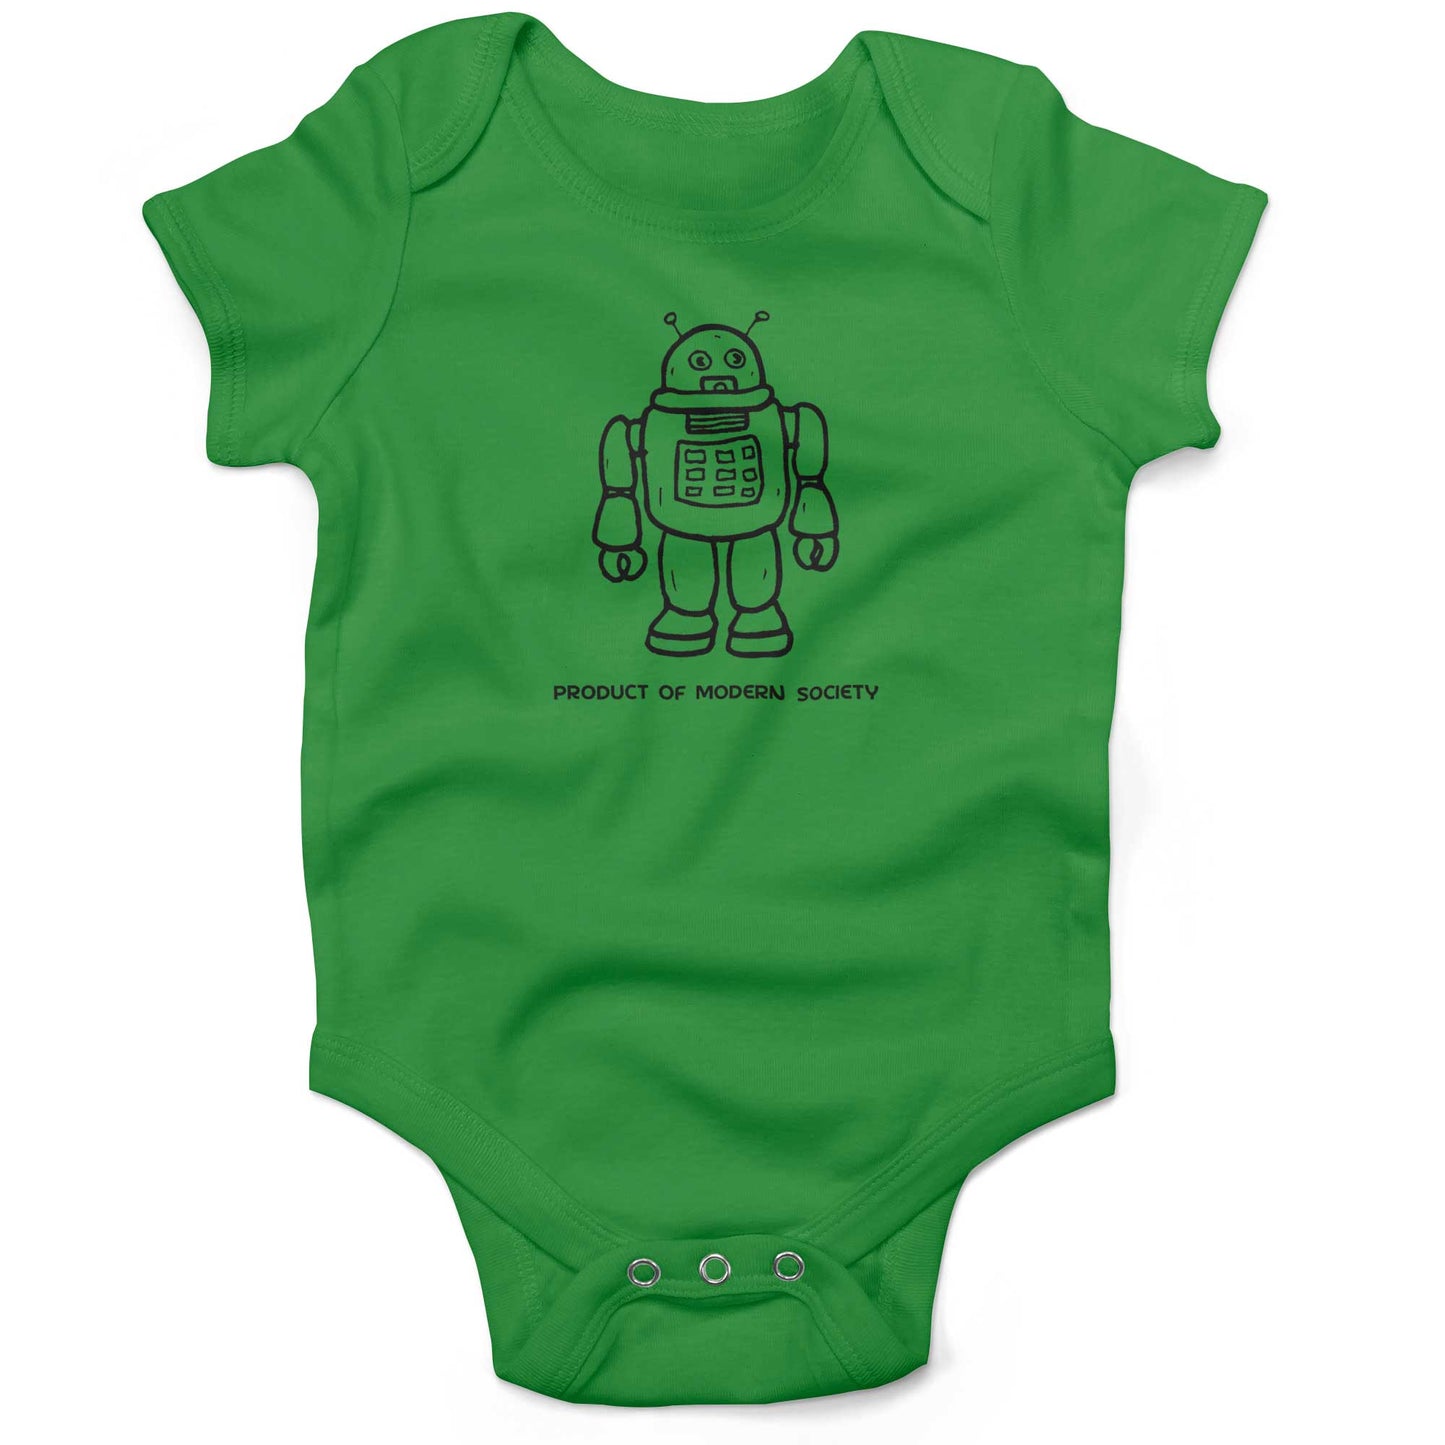 Product Of Modern Society Infant Bodysuit-Grass Green-3-6 months